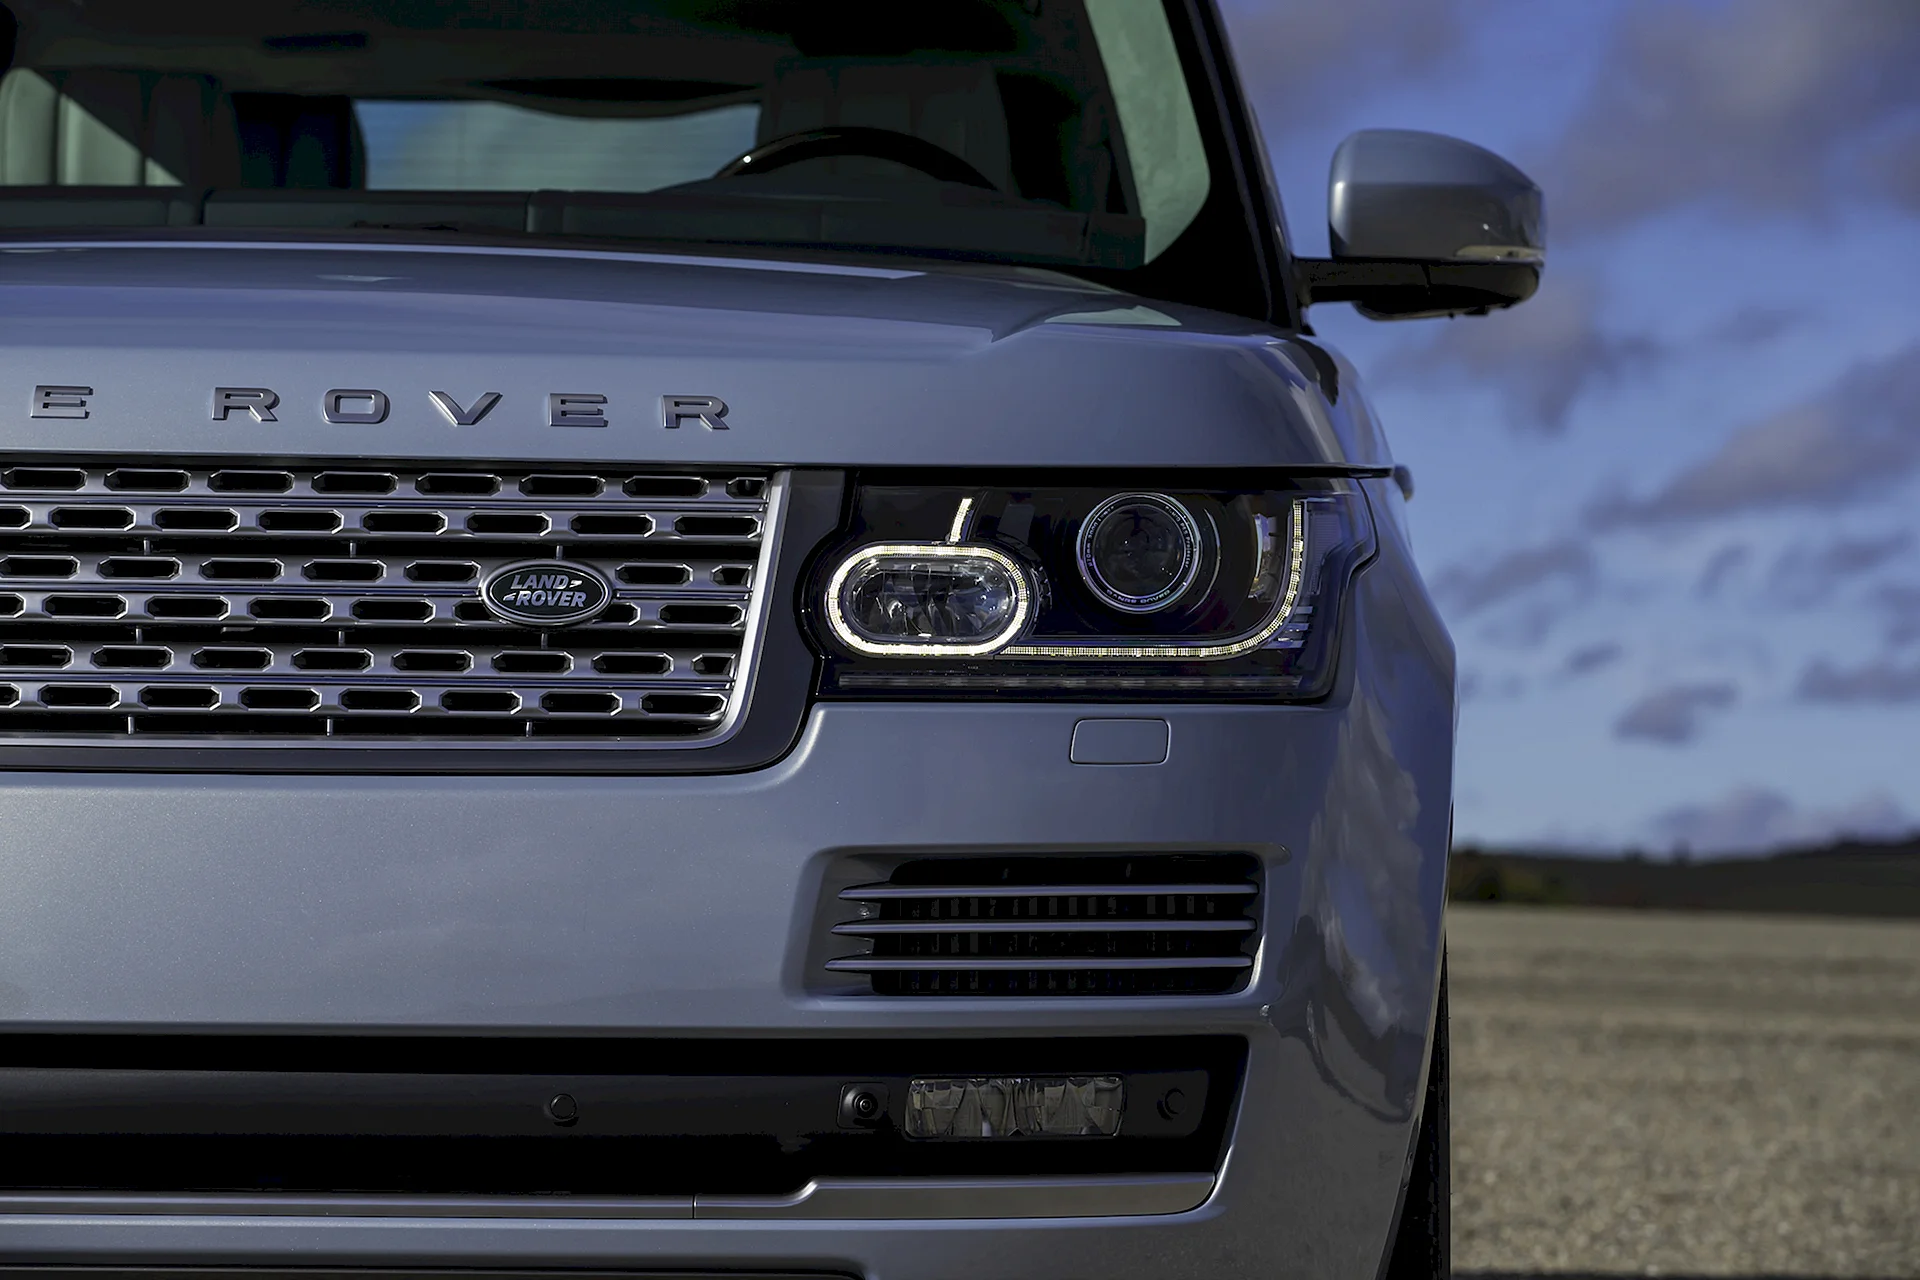 Range Rover Front View Wallpaper